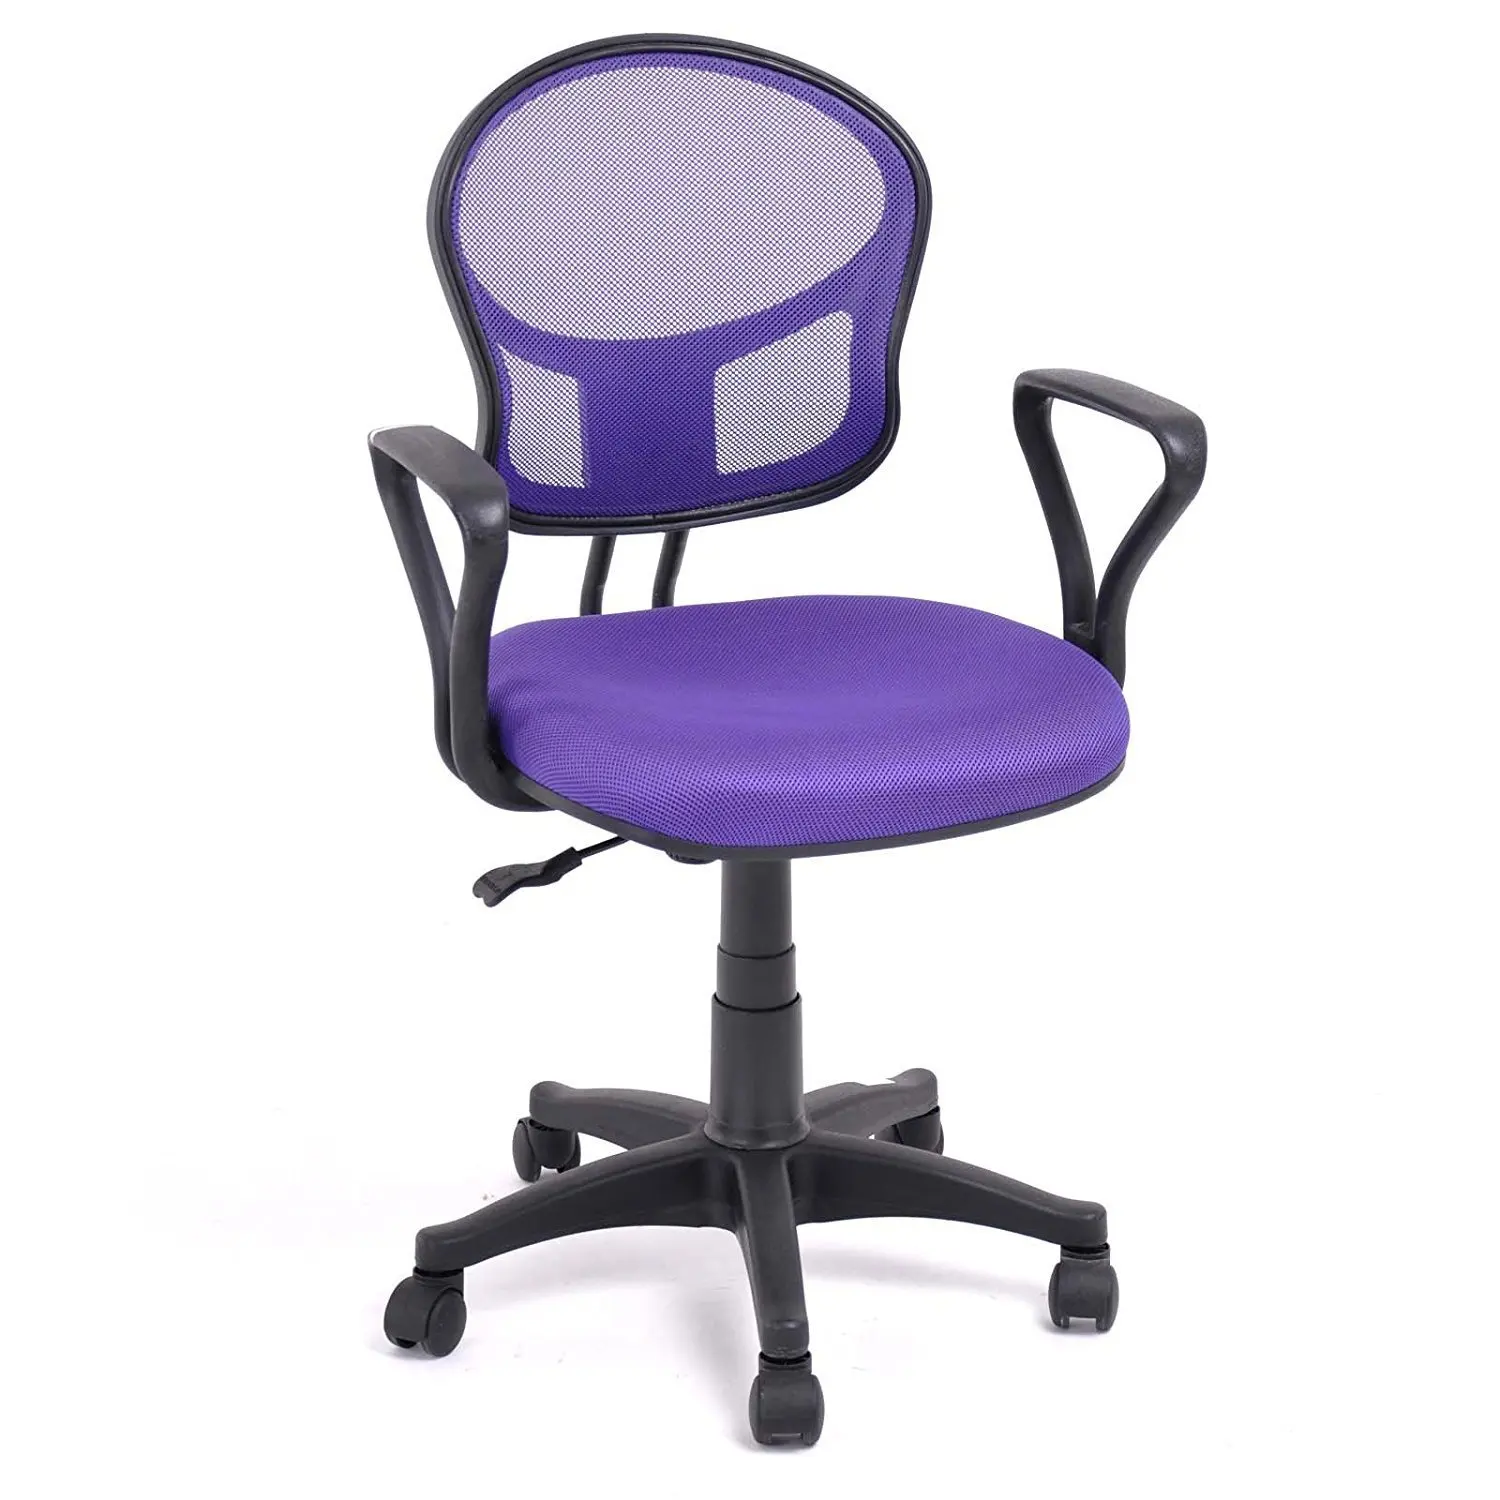 Cheap Purple Office Chair, find Purple Office Chair deals on line at